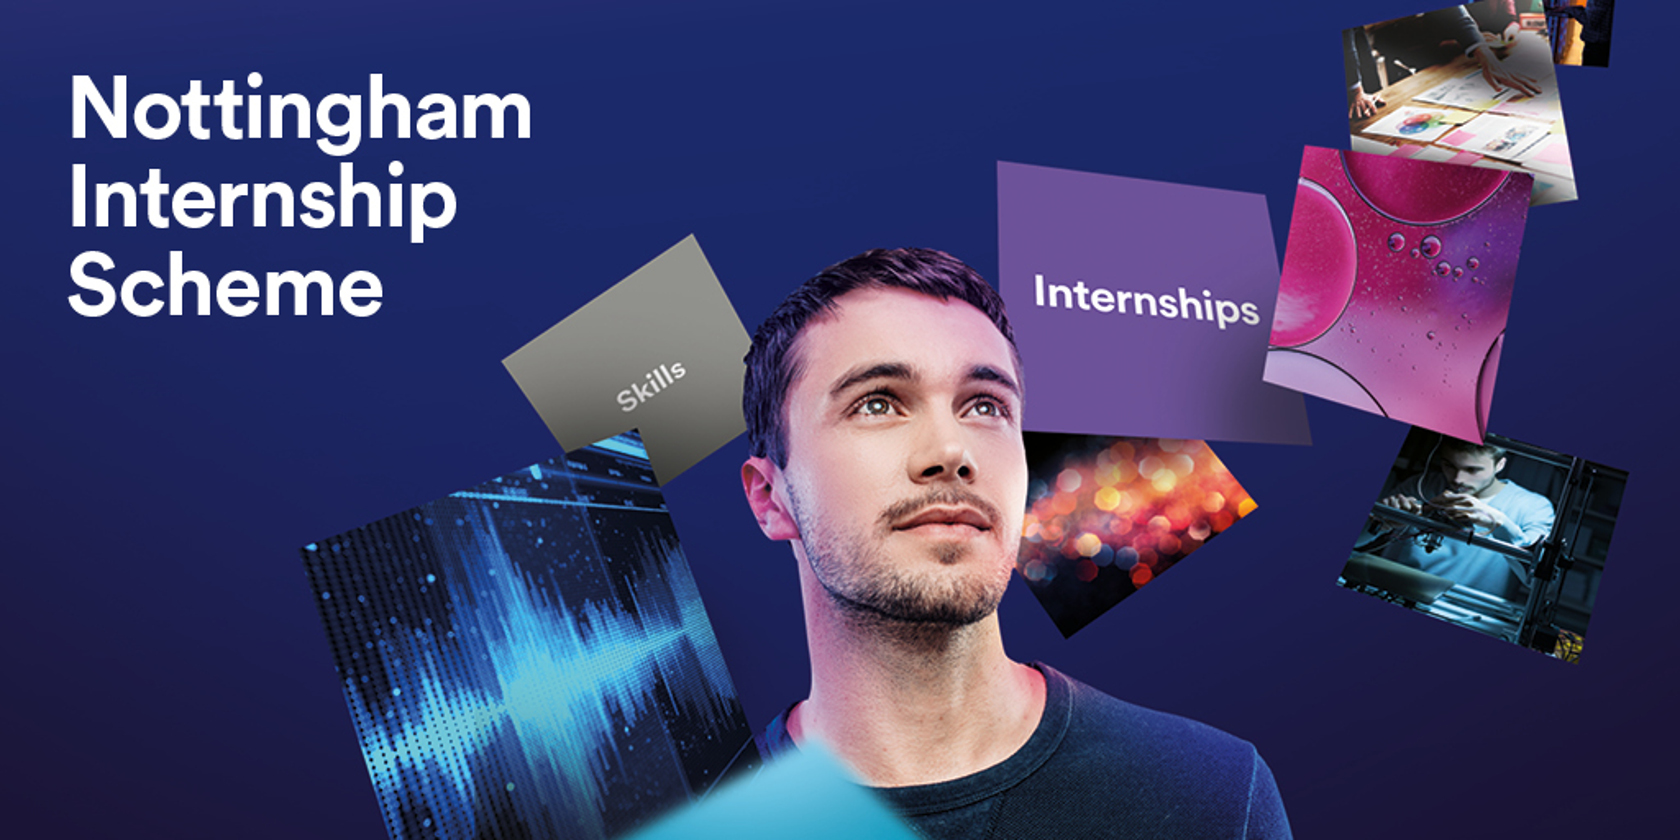 Nottingham Internship Scheme promotion. A man standing surrounded by multiple sloating boxes containing internships skills and inspirational images.